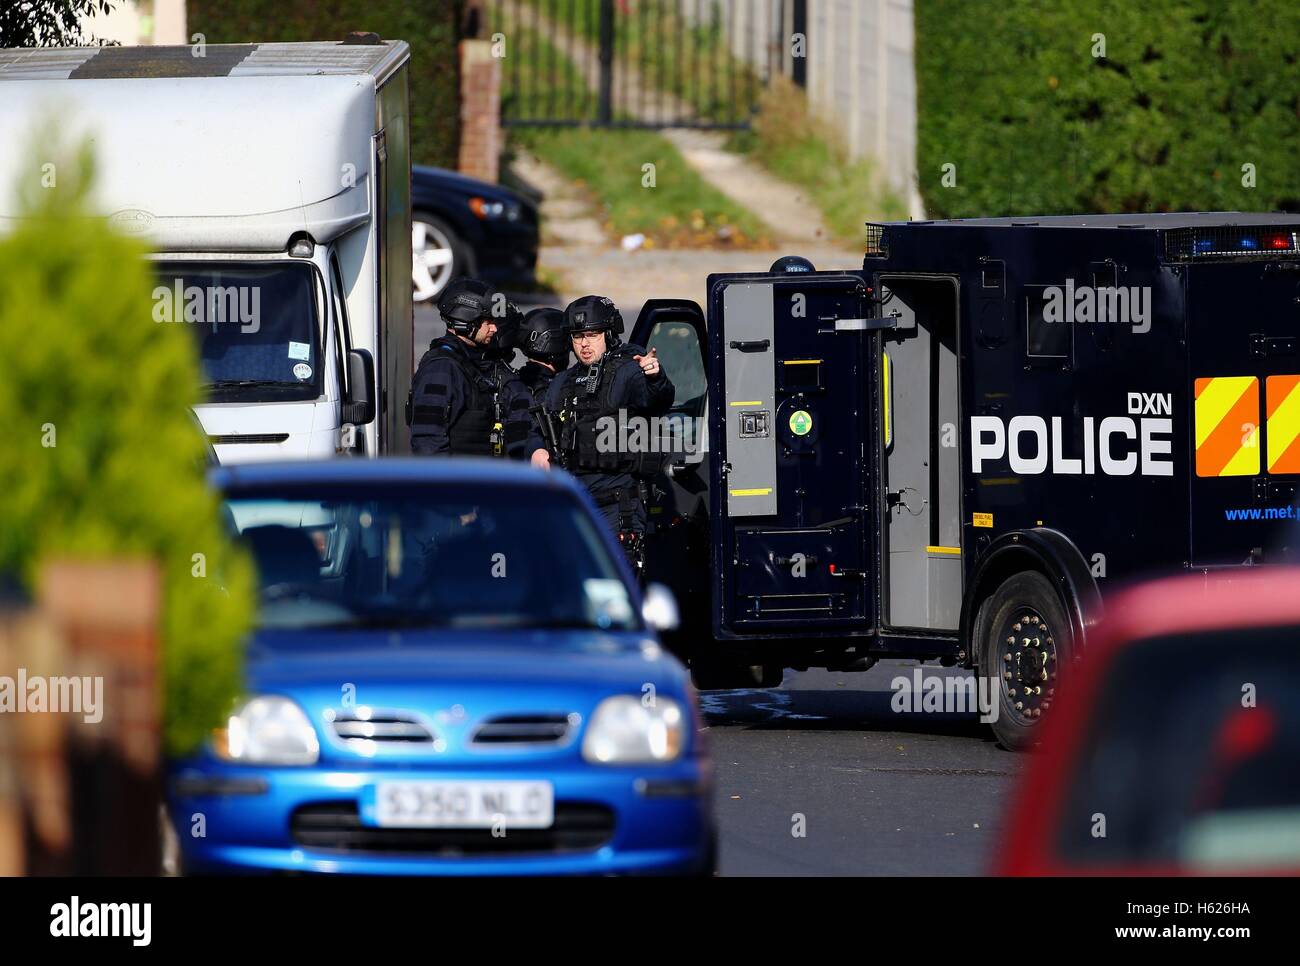 Armed police officers at the scene in Northolt, London, where they remain locked in a stand-off with a man at an address in Wood End Lane, who is said to be in possession of dangerous items including petrol and combustibles. Stock Photo